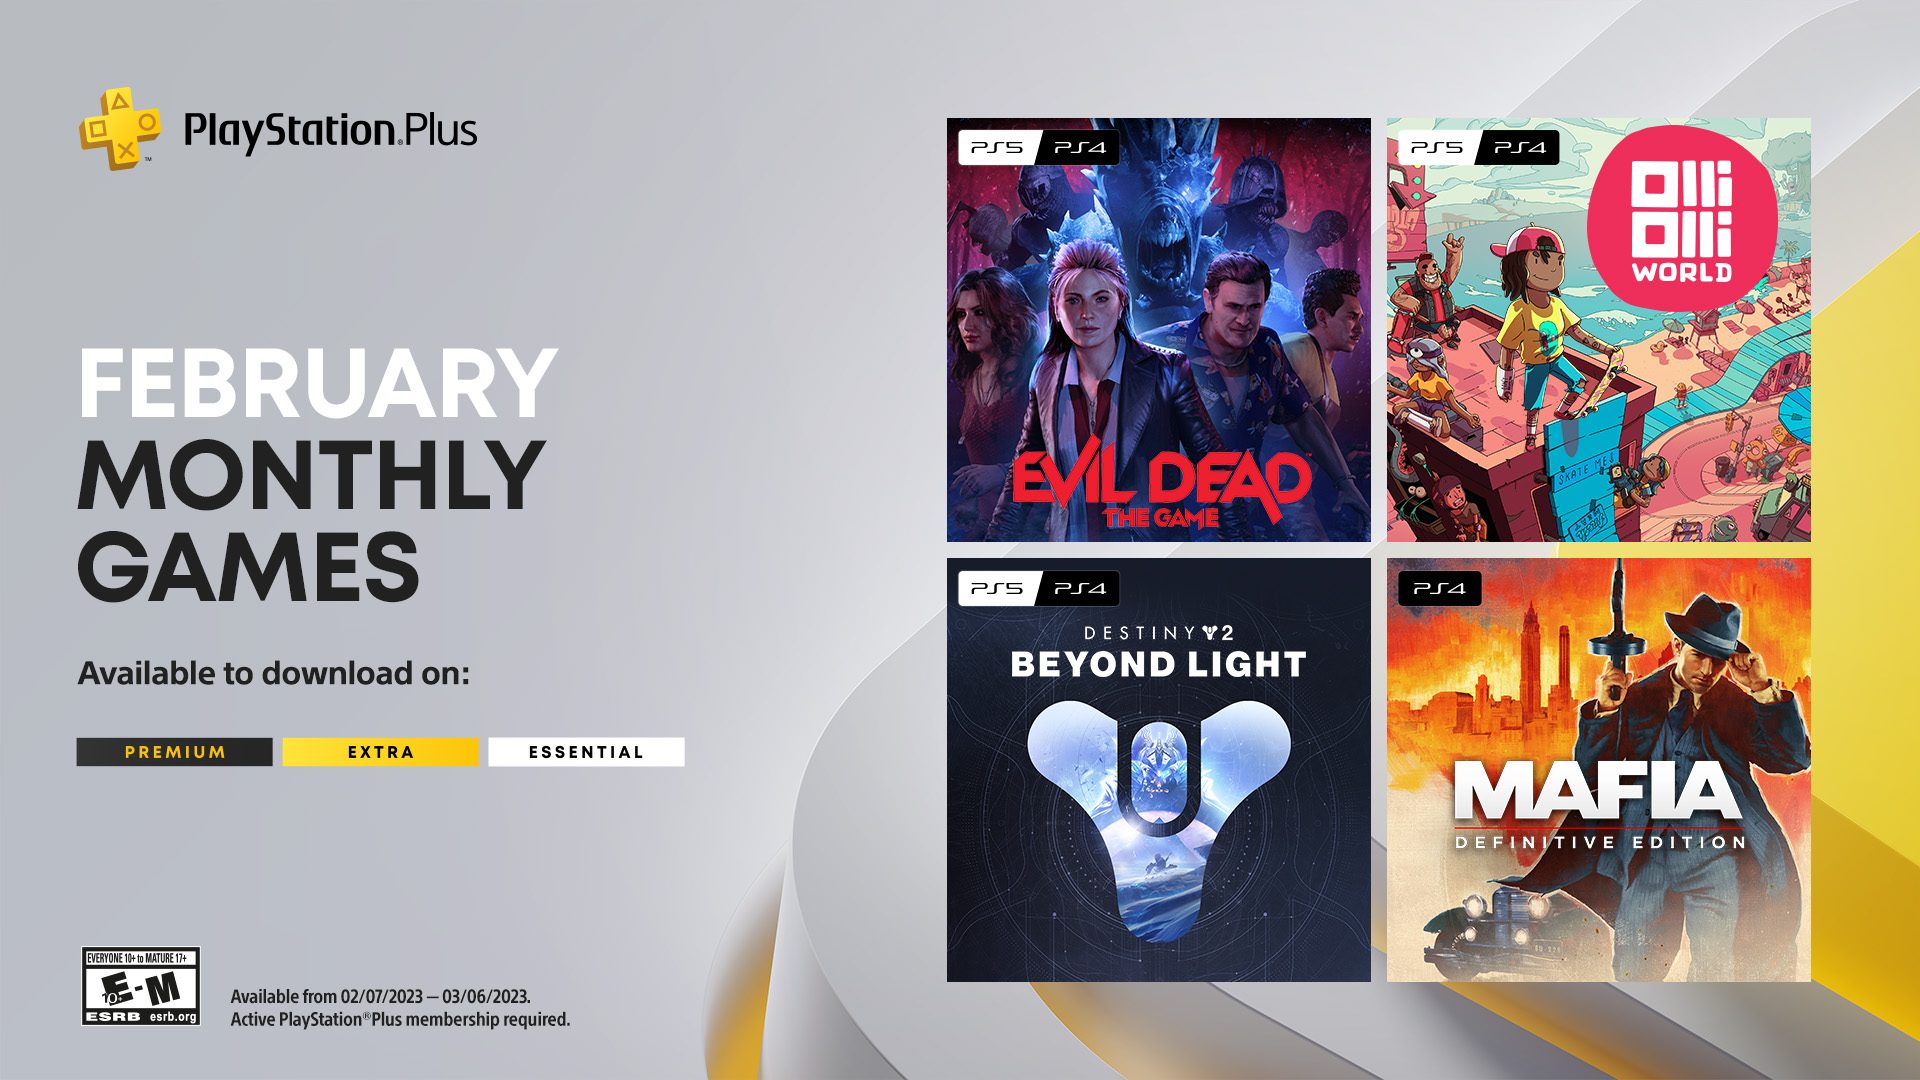 PlayStation Plus Monthly Games for February: Evil Dead: The Game, OlliOlliWorld, Destiny 2: Beyond Light, Mafia: Definitive Edition – PlayStation.Blog